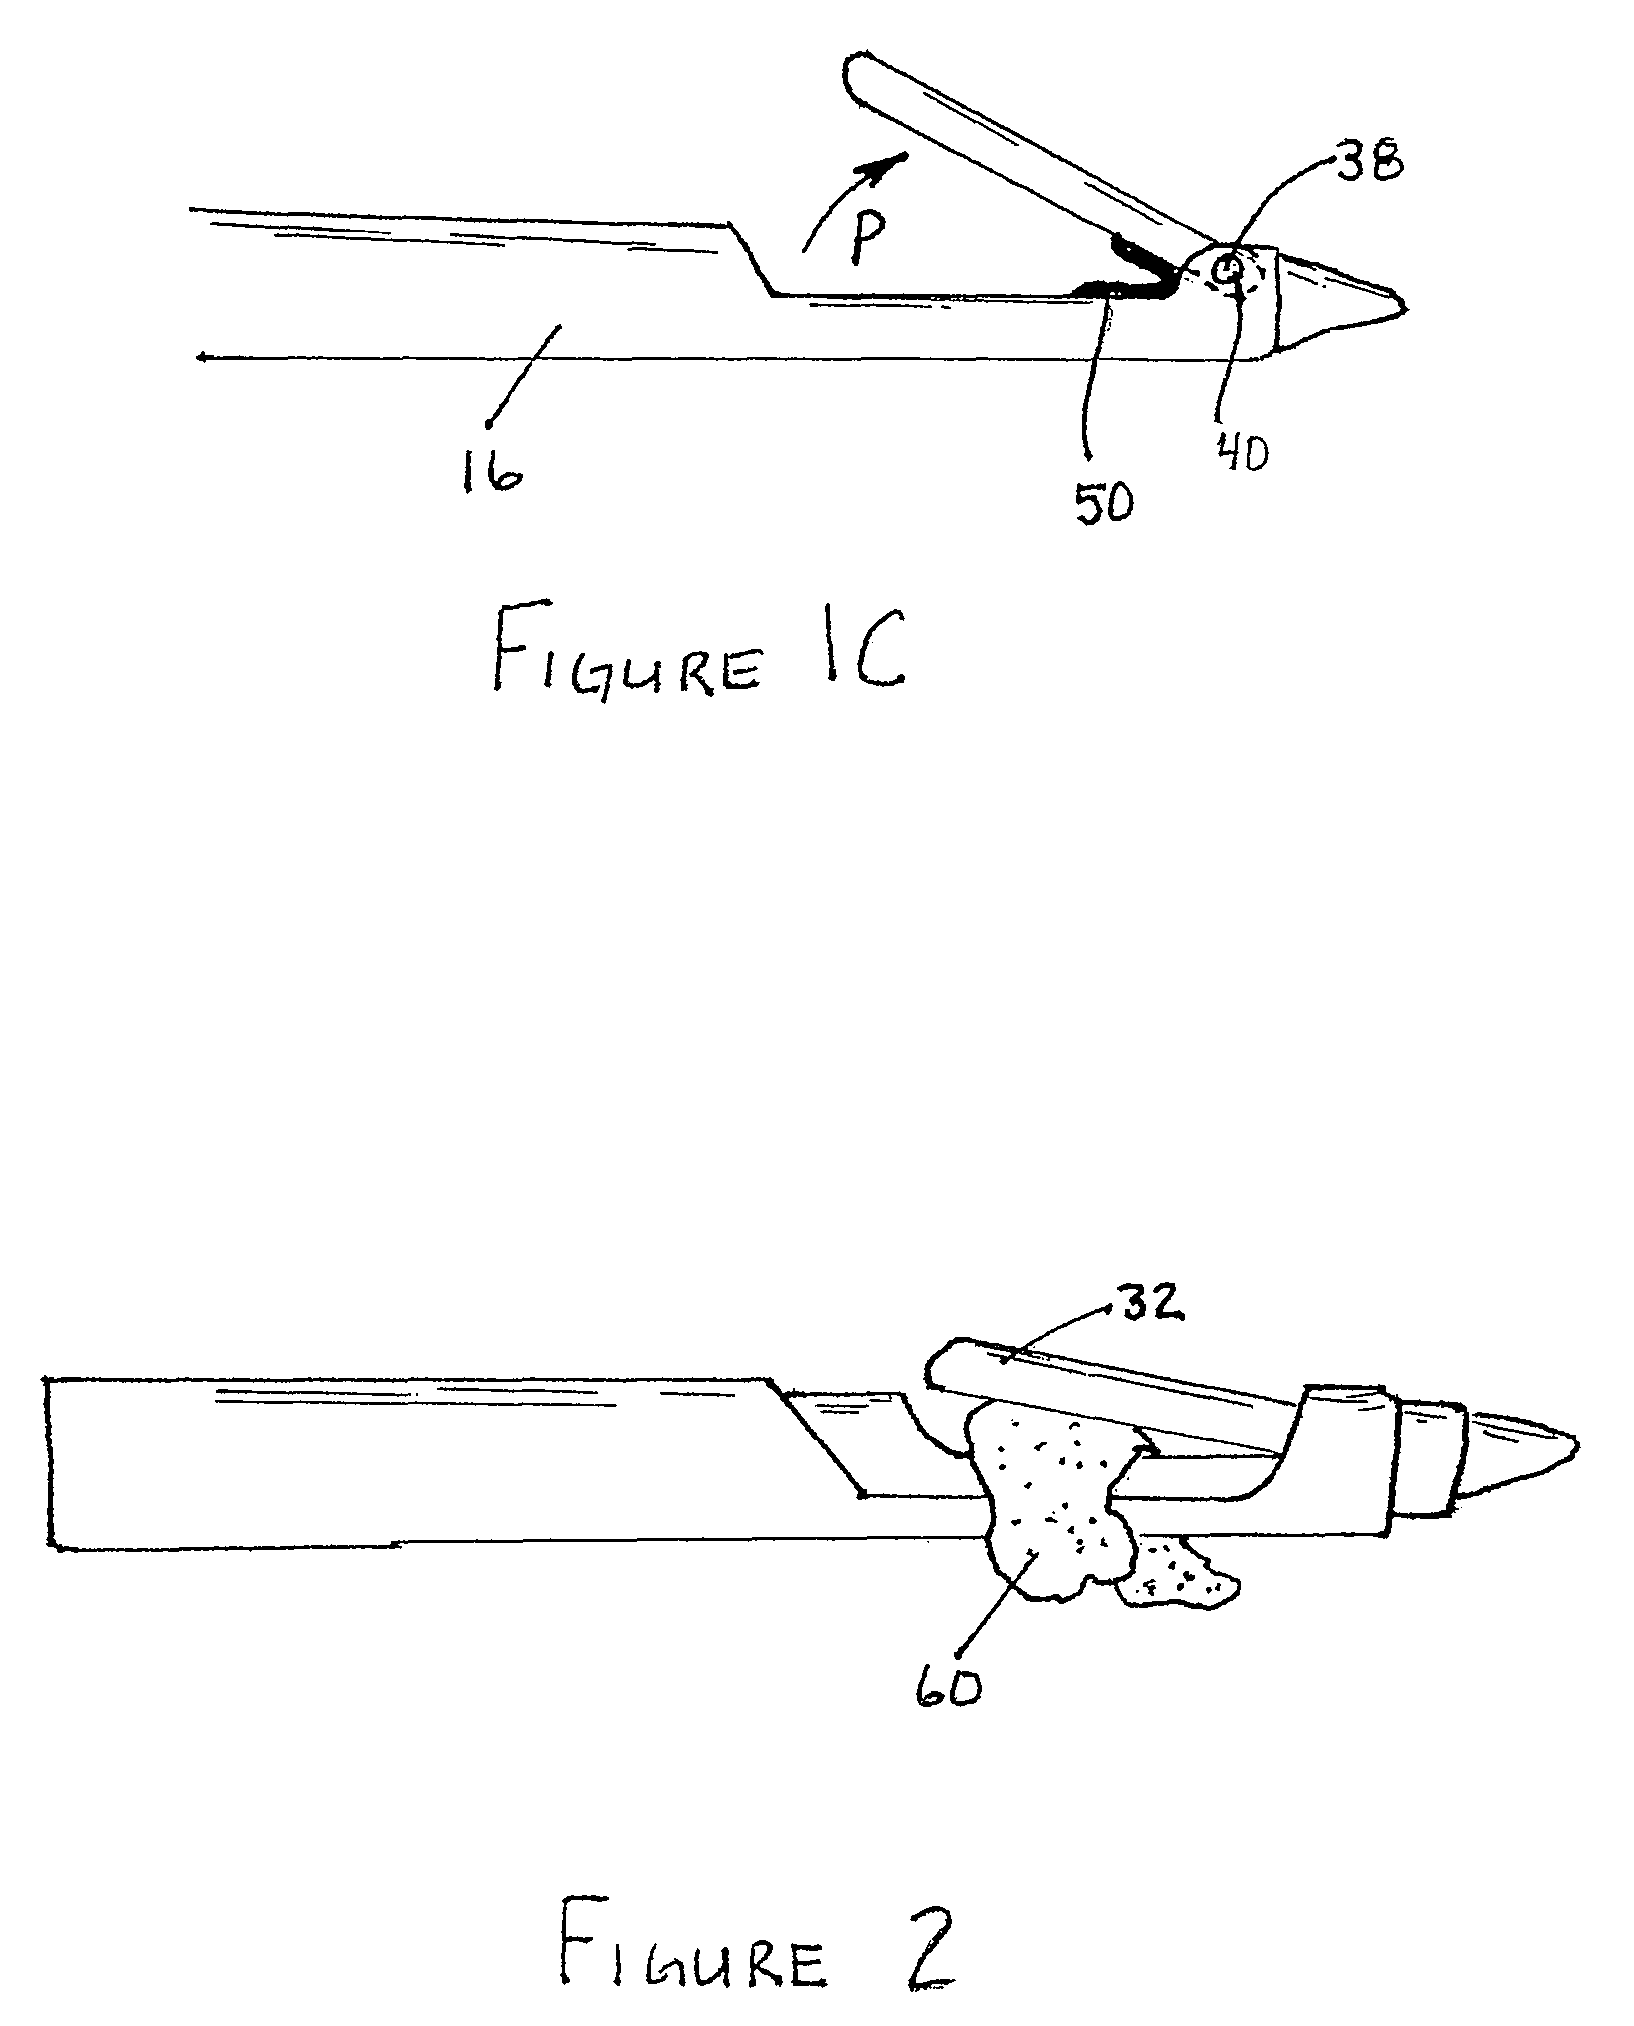 Reverse sealing and dissection instrument